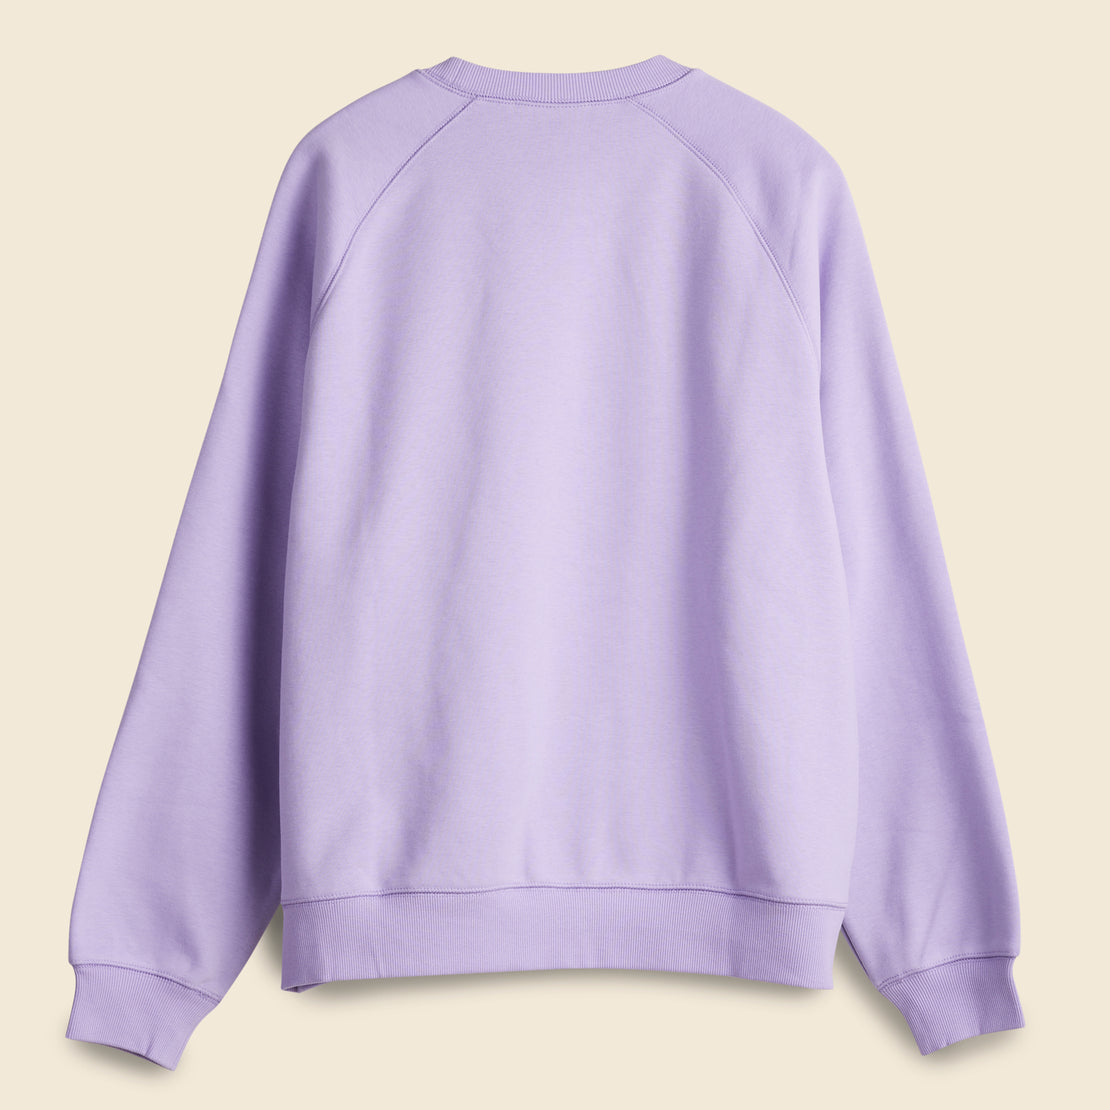 Chase Crewneck Sweatshirt - Soft Lavender - Carhartt WIP - STAG Provisions - W - Tops - L/S Fleece